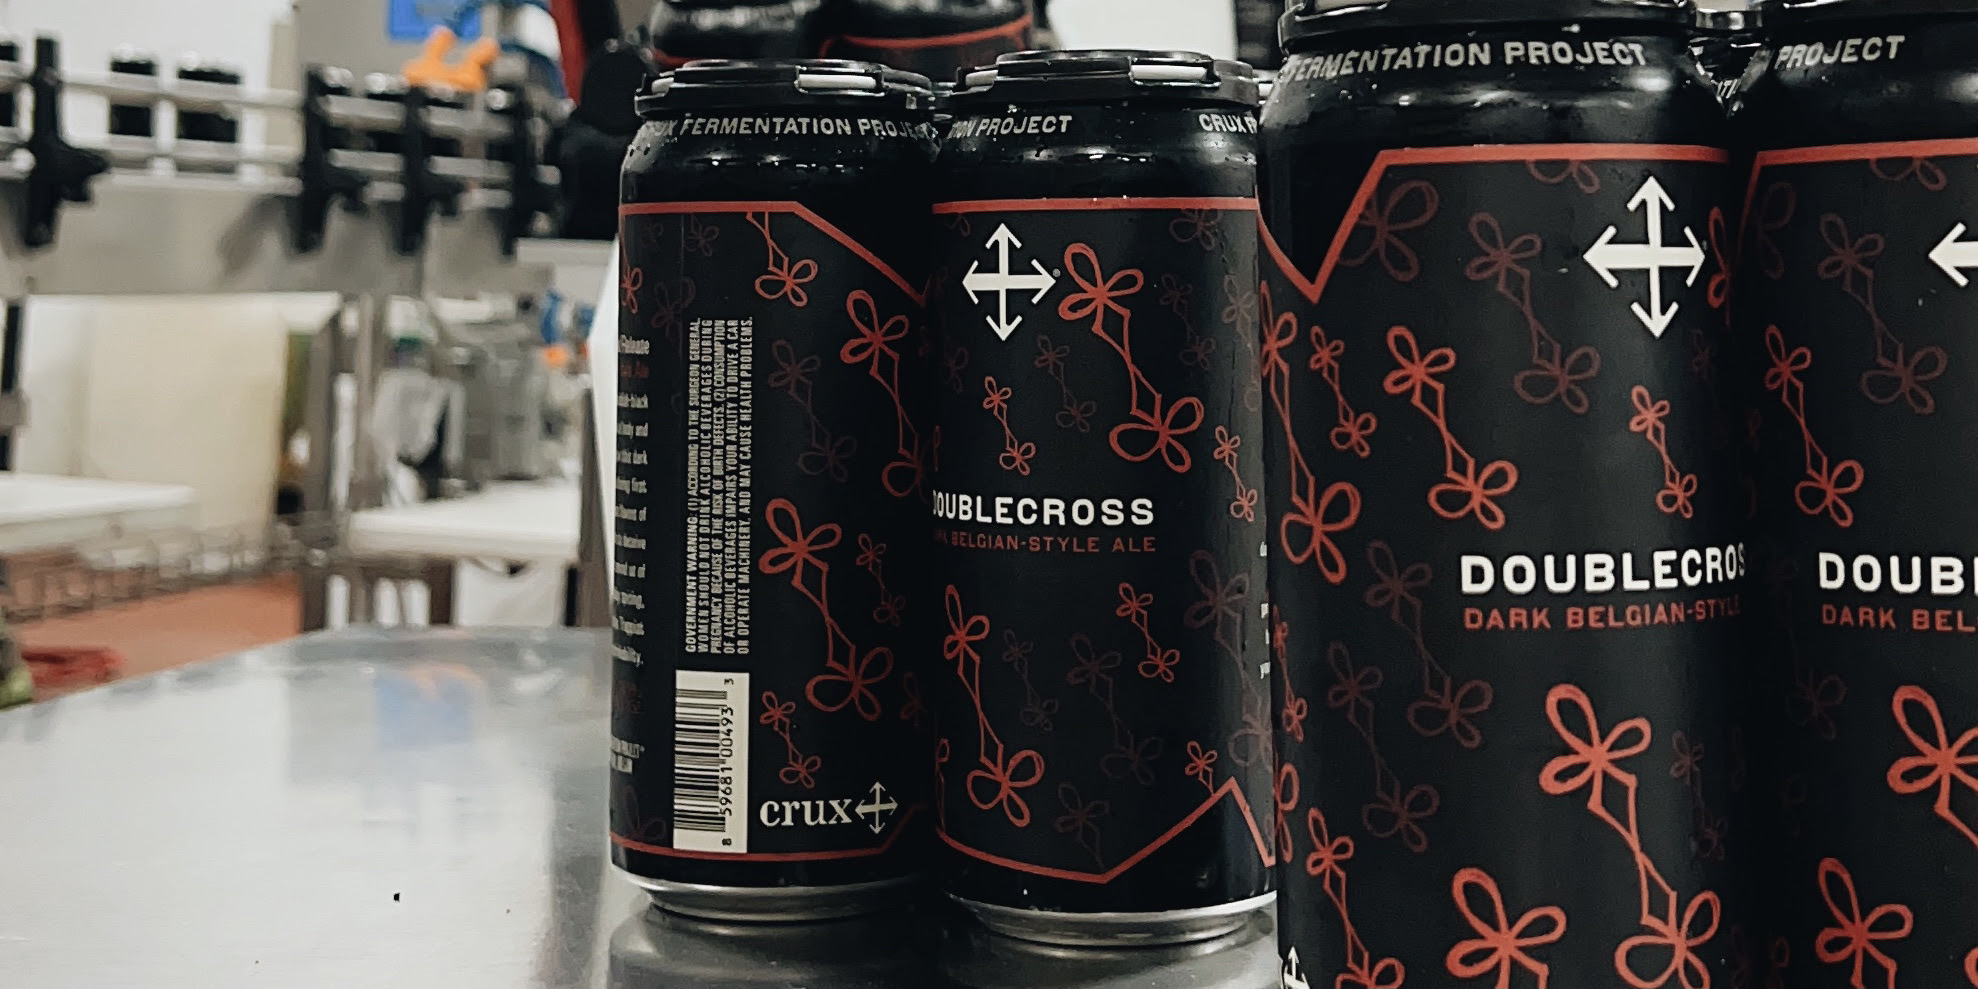 image of Doublecross courtesy of Crux Fermentation Project